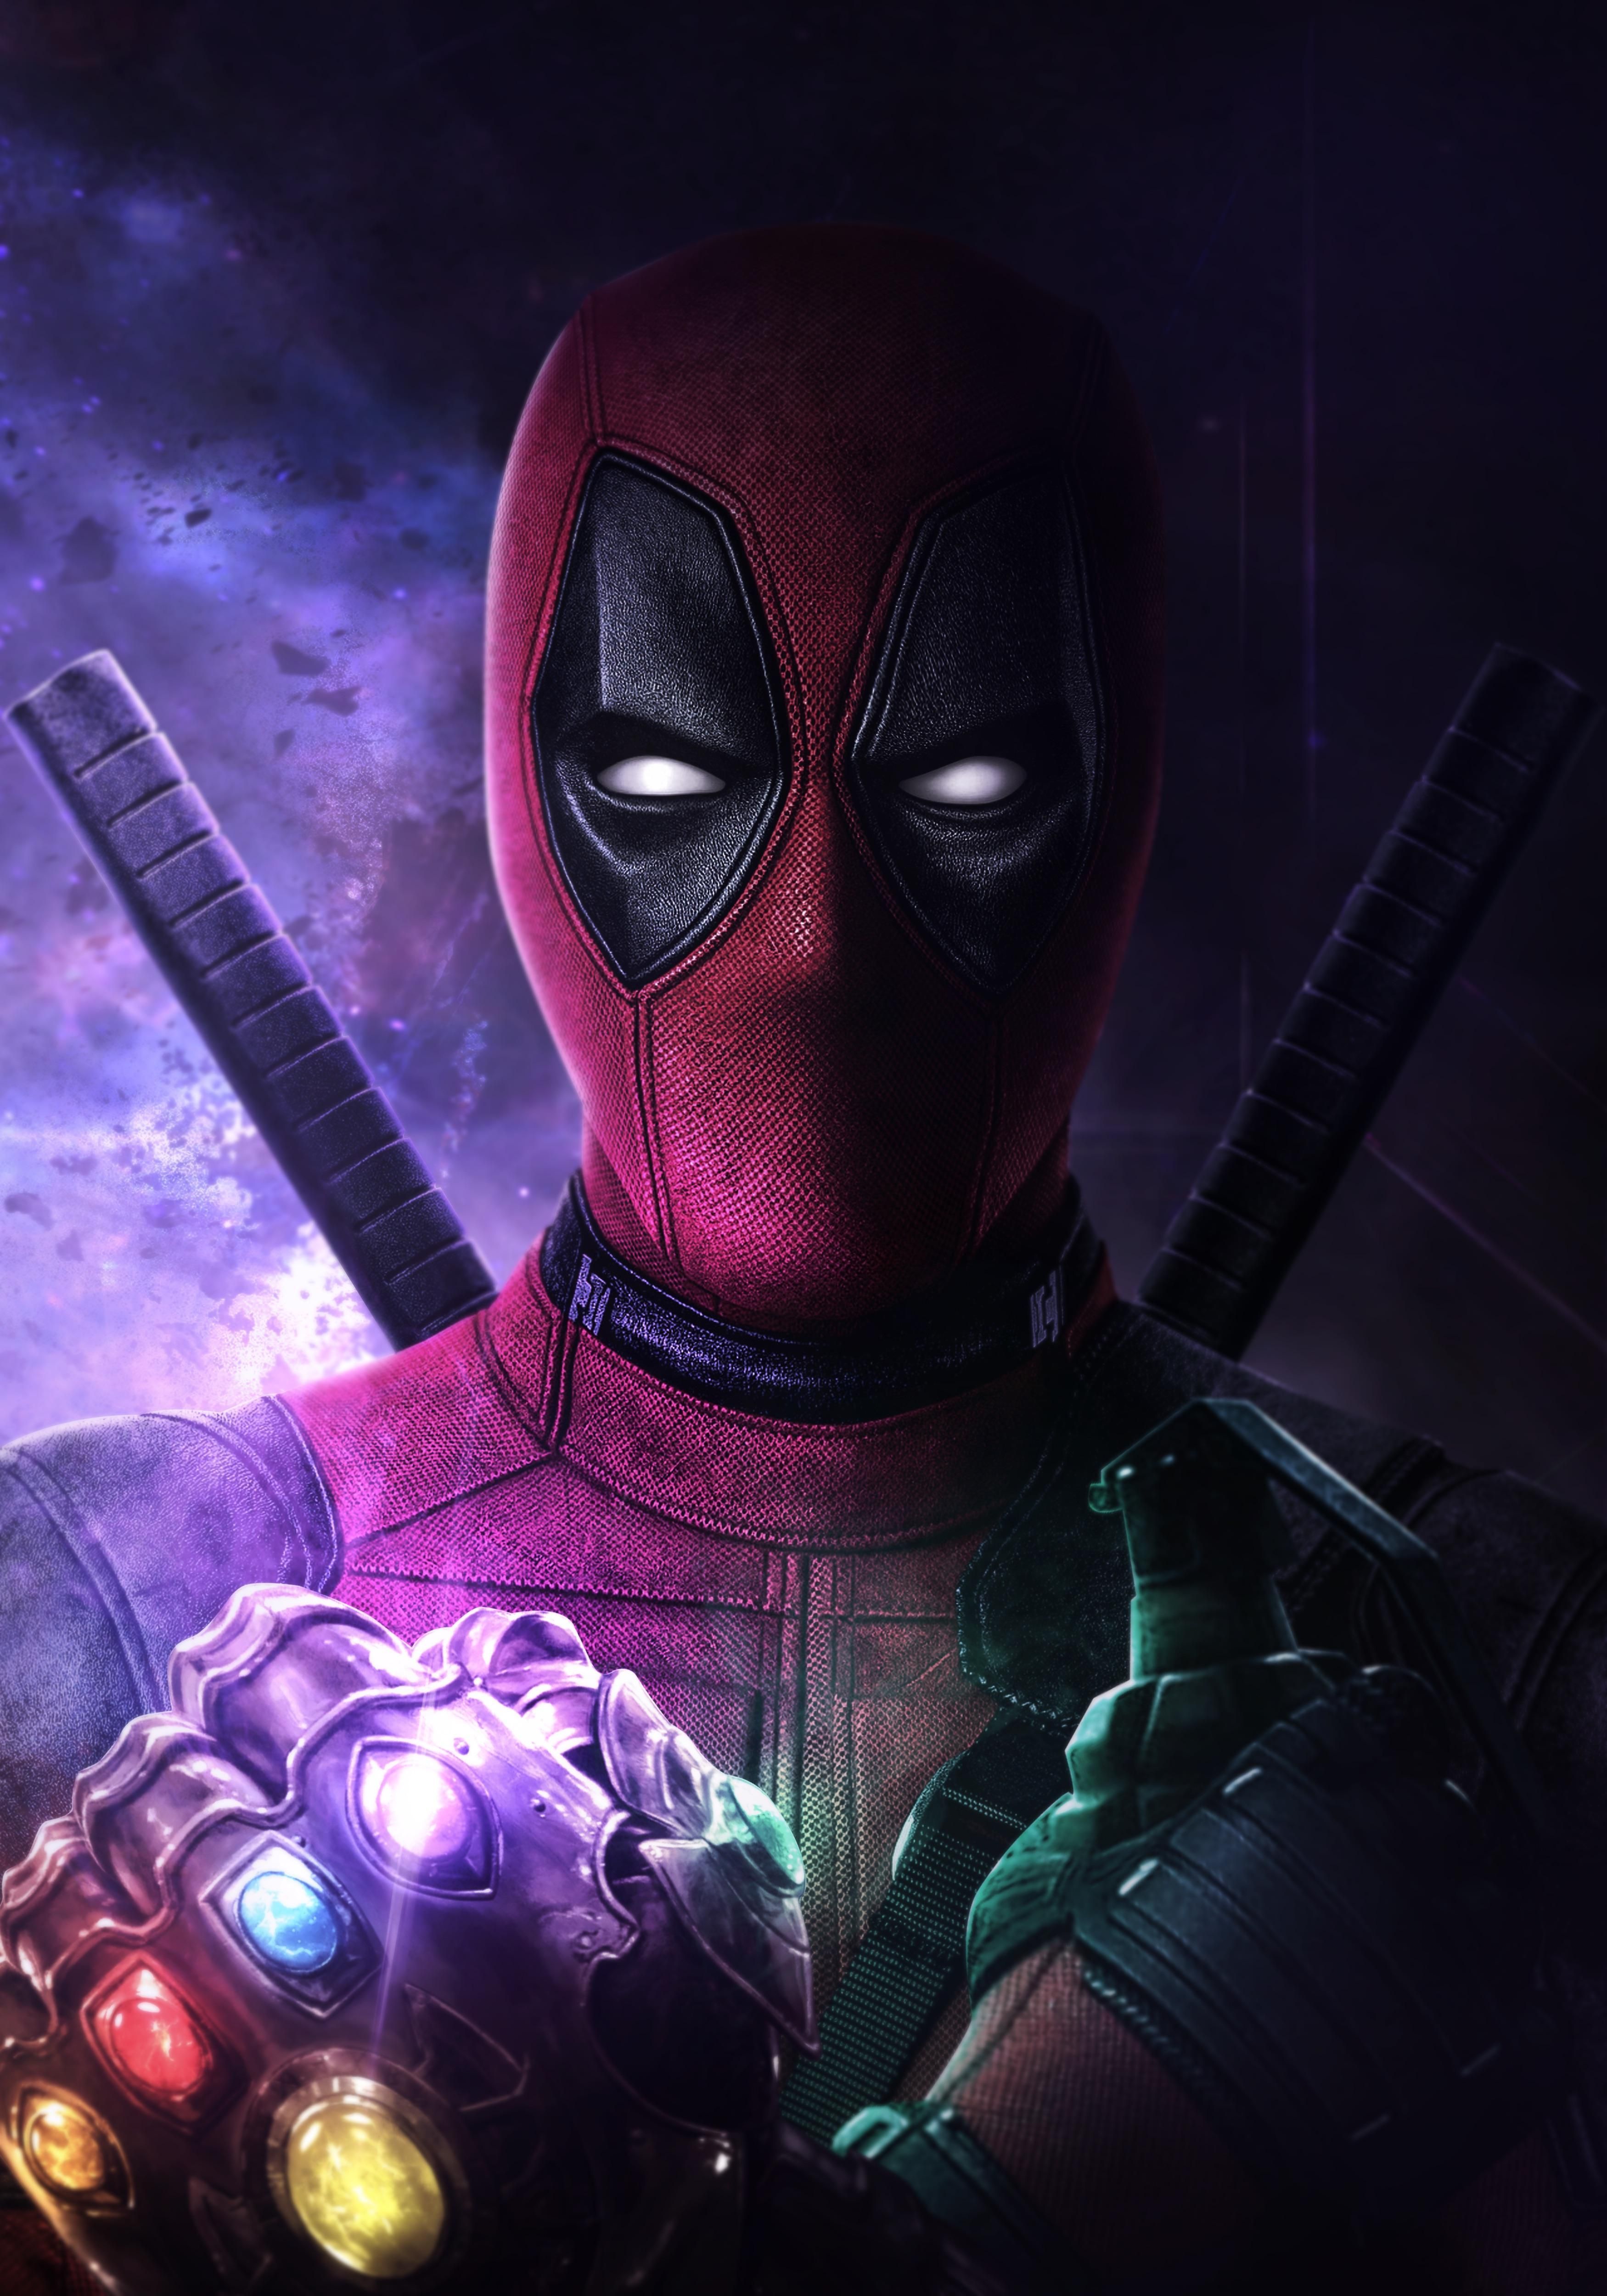 Thanos Pool! Here is an edit I made mashing Deadpool and Thanos together after the Disney deal. h. Deadpool artwork, Deadpool wallpaper, Deadpool wallpaper iphone